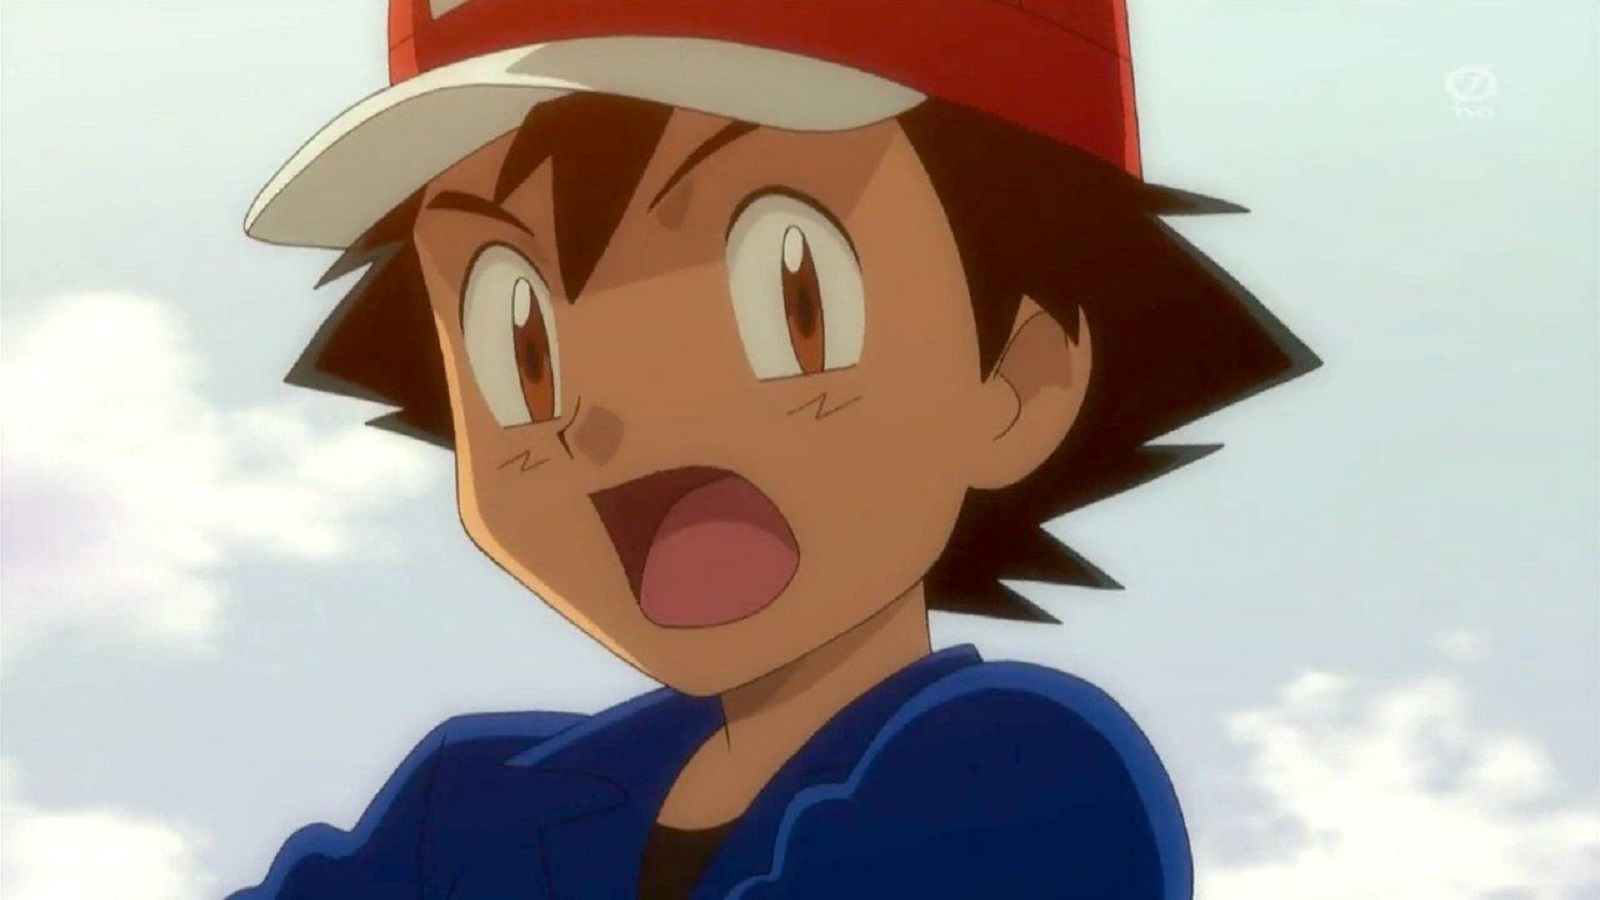 Leaker claims Pokemon anime is 'in trouble' after sinister comments from staff Dexerto